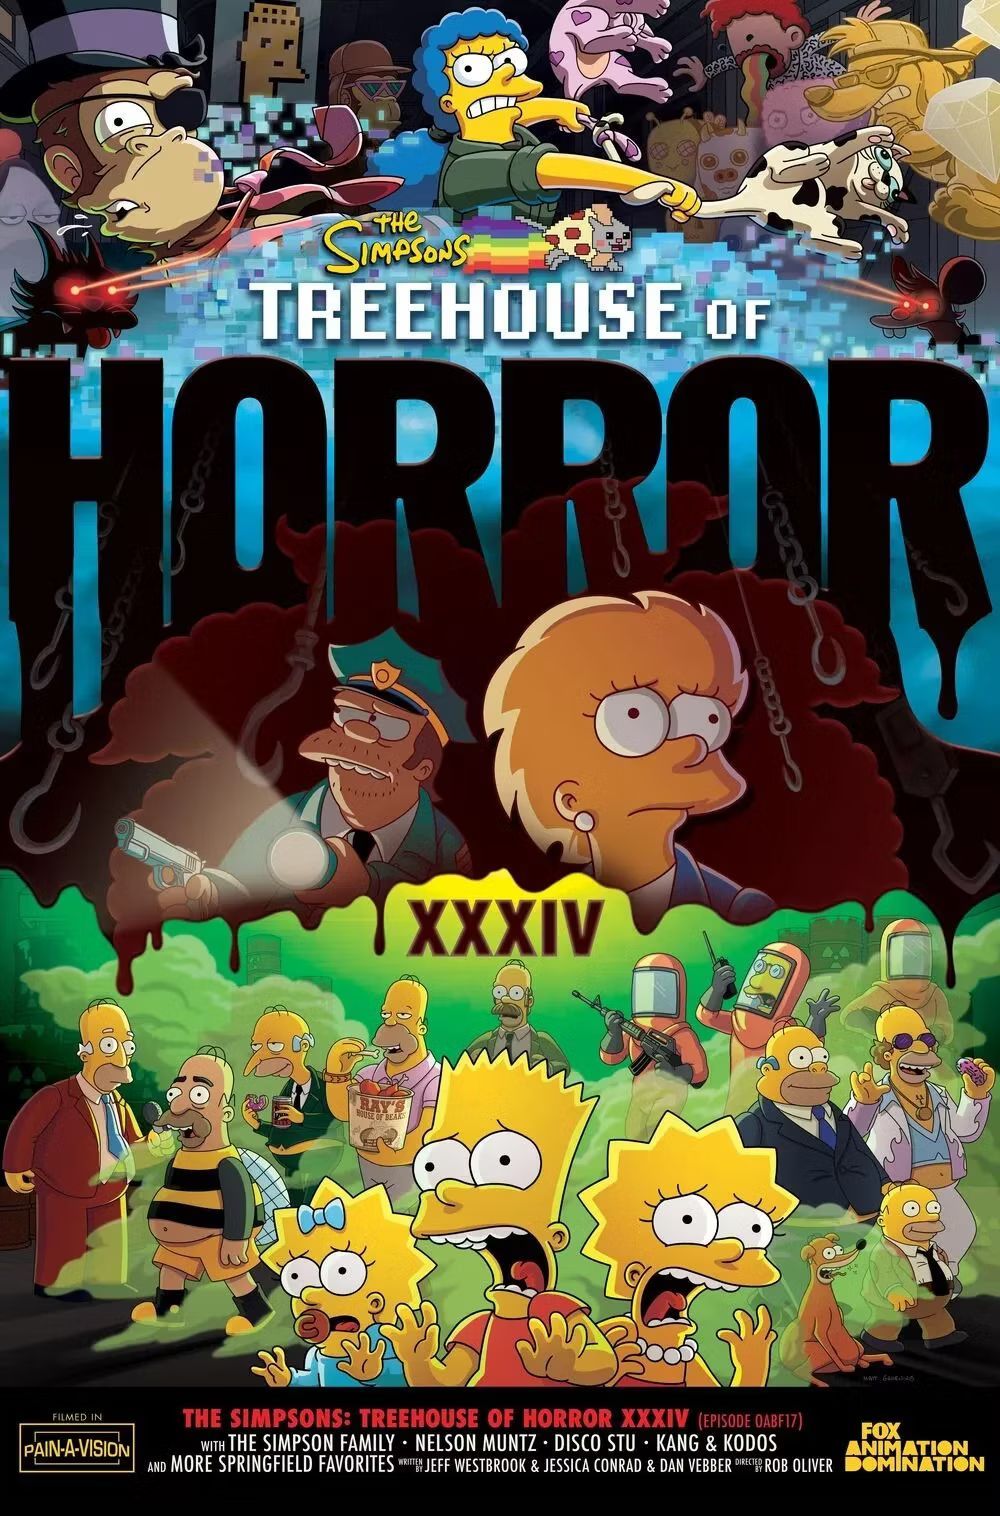 The Simpsons’ Treehouse of Horror 34 Poster Unveils Spooky Surprises in